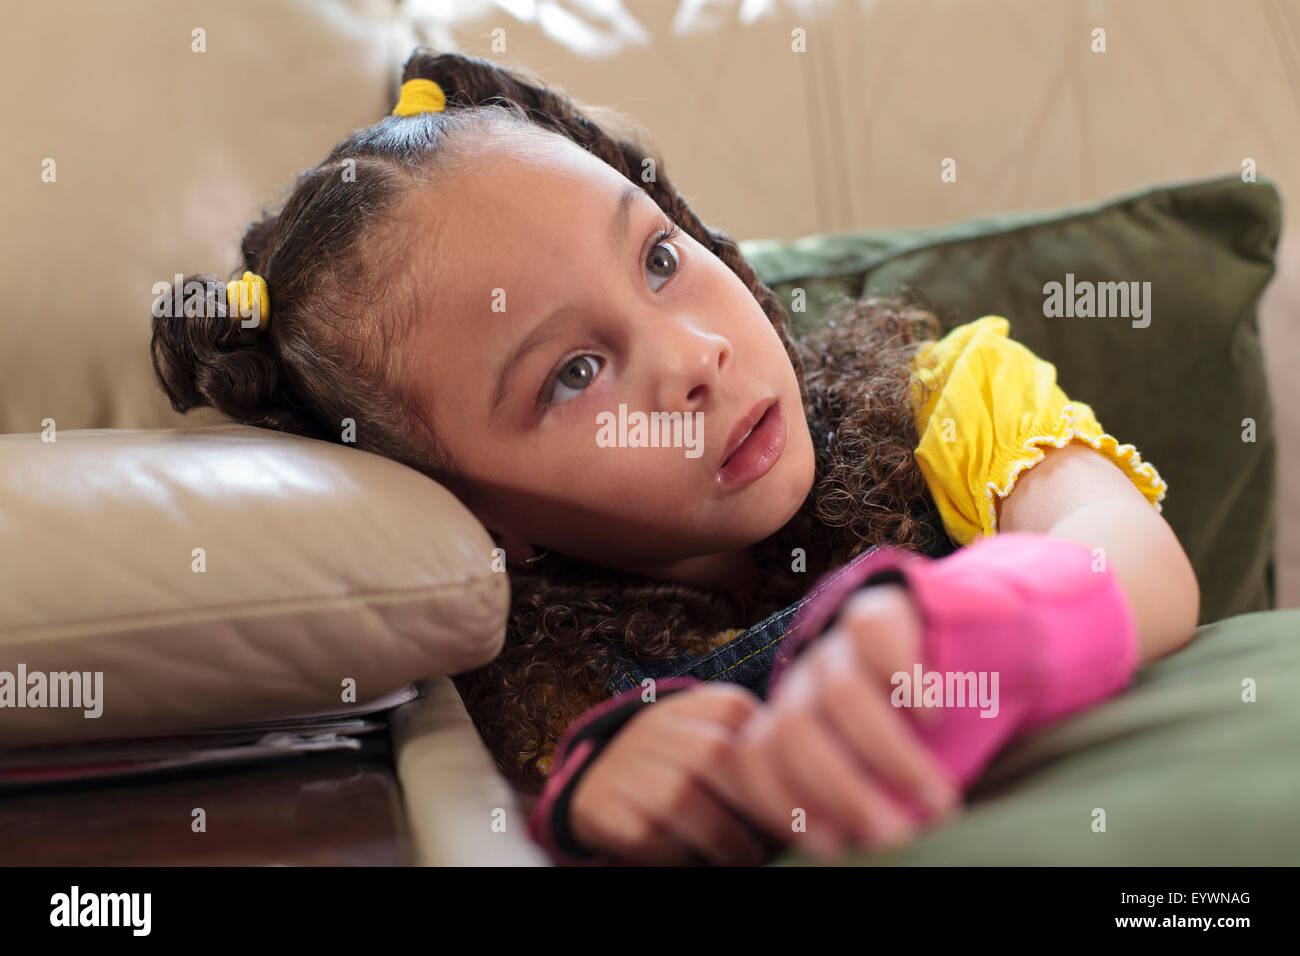 Little girl with Cerebral Palsy sitting at home Stock Photo